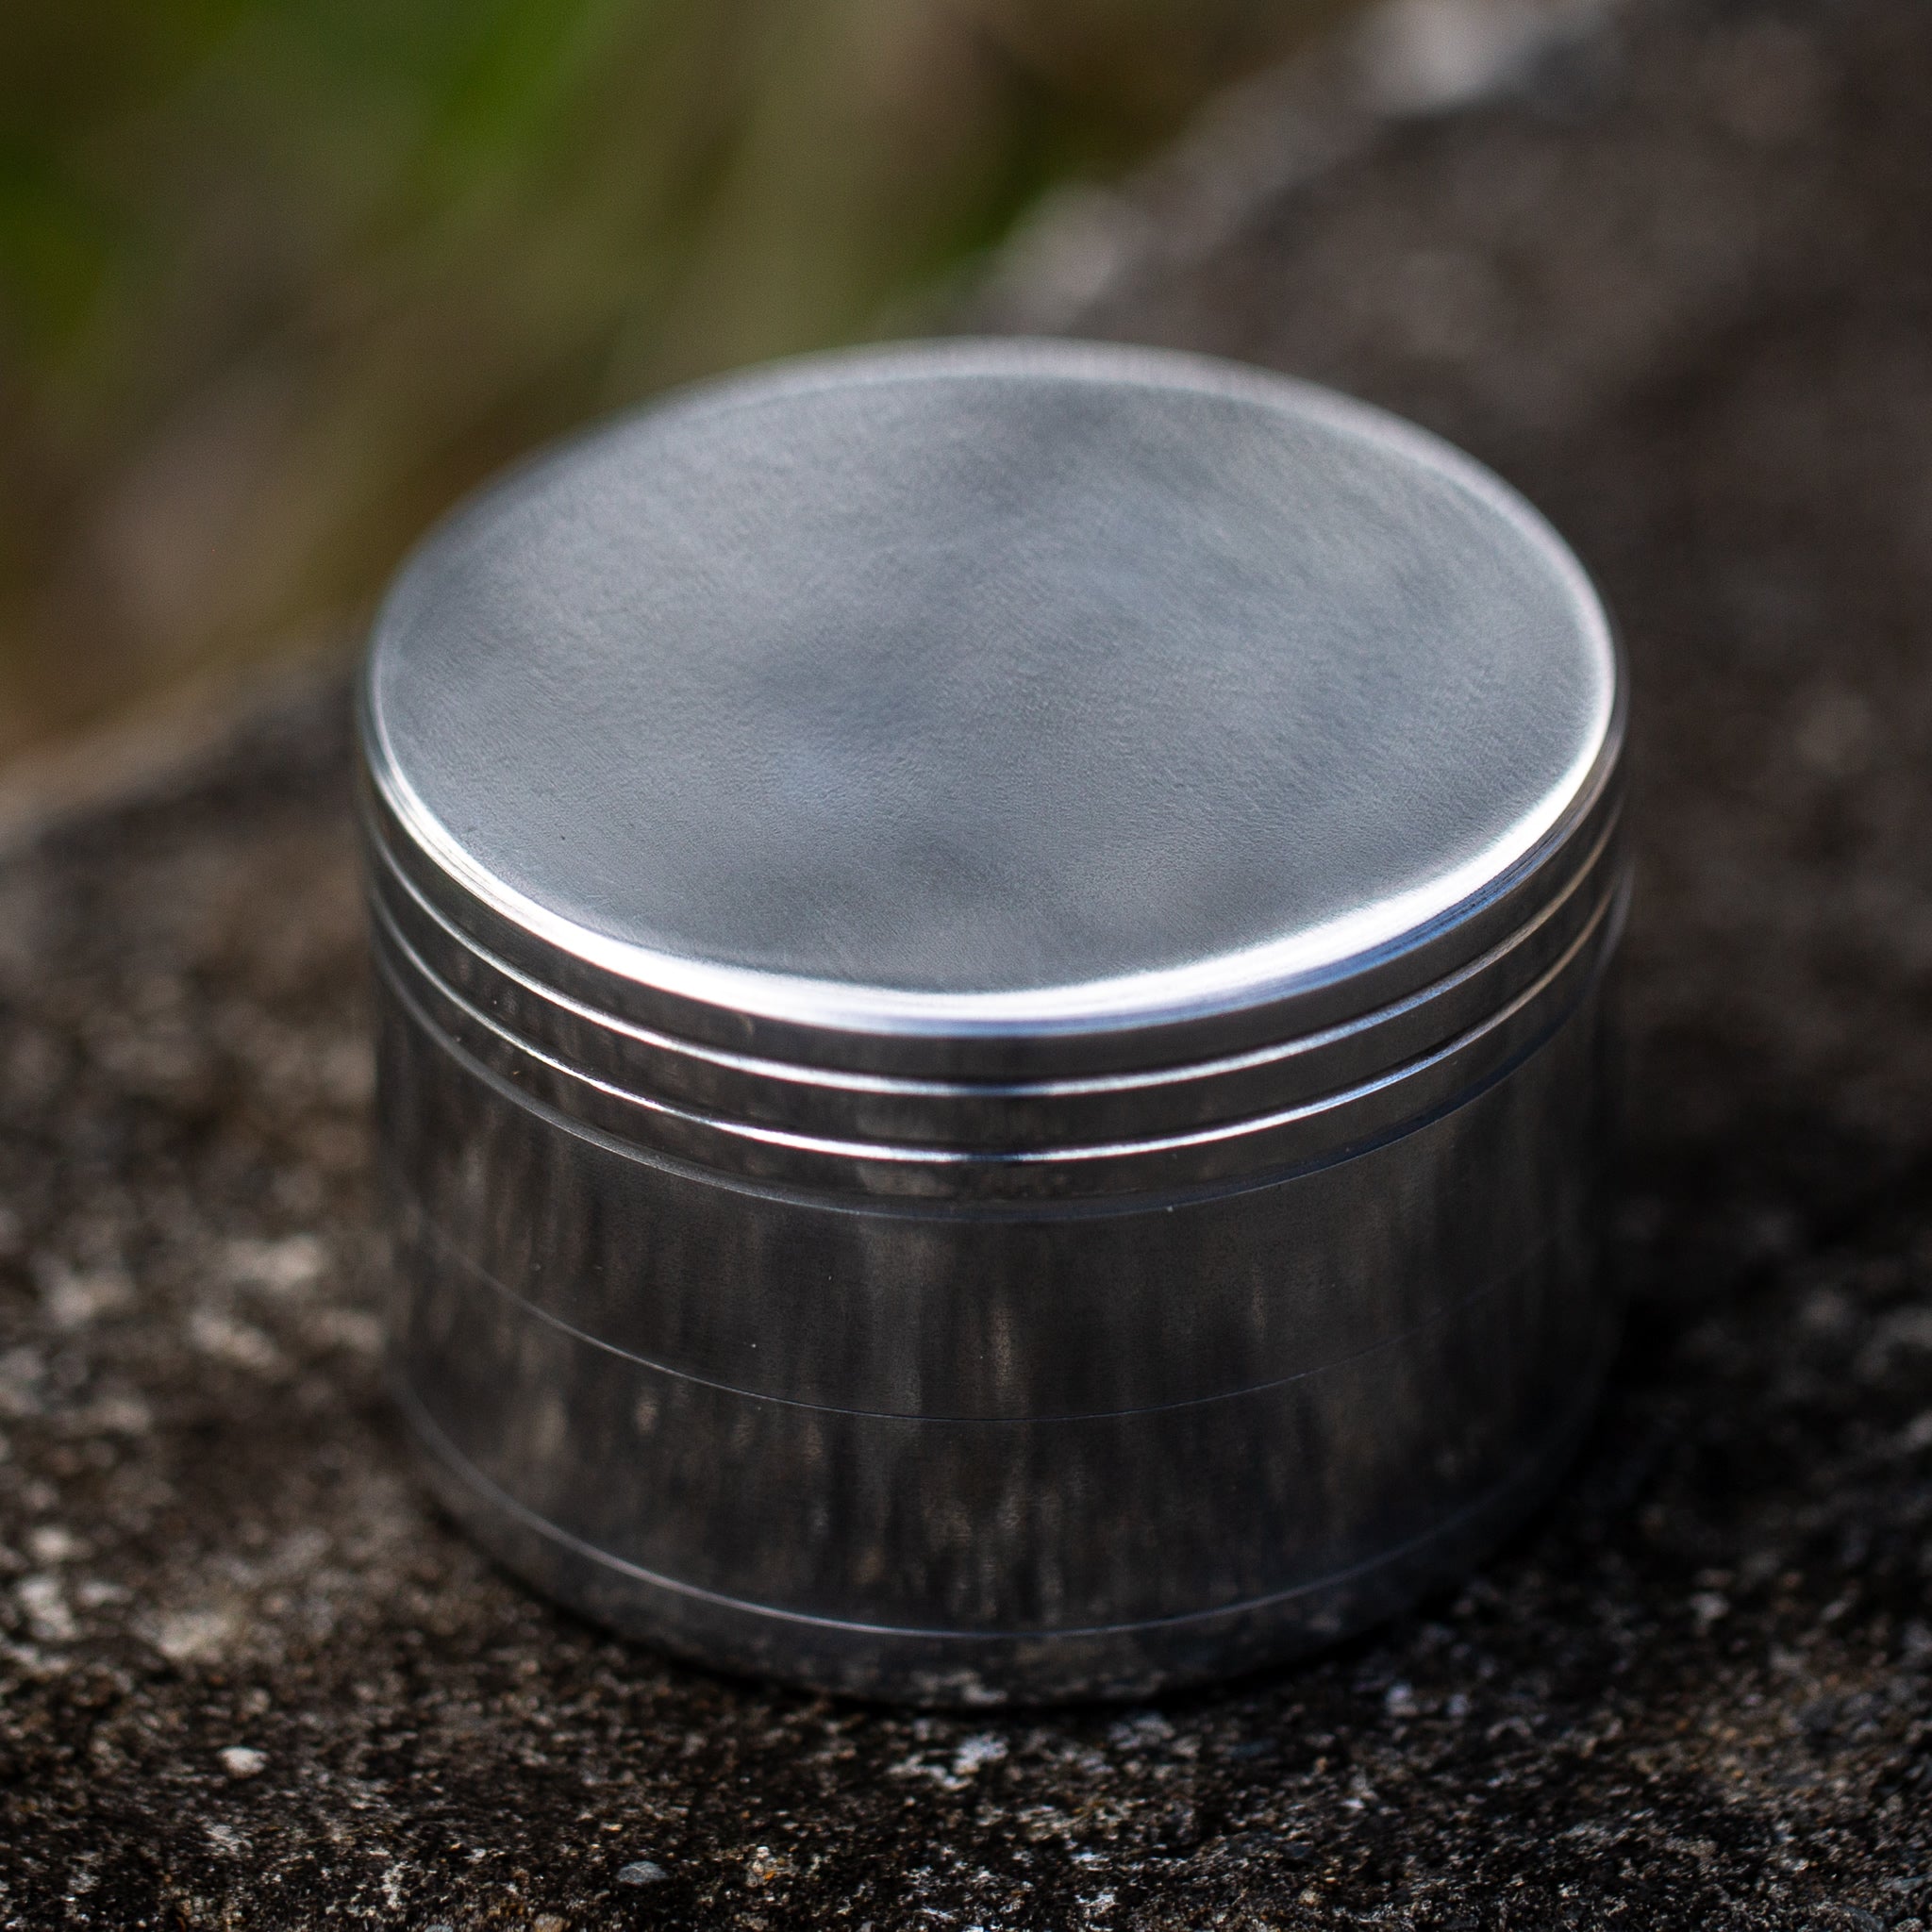 Weed grinder outside from Agung Australia.